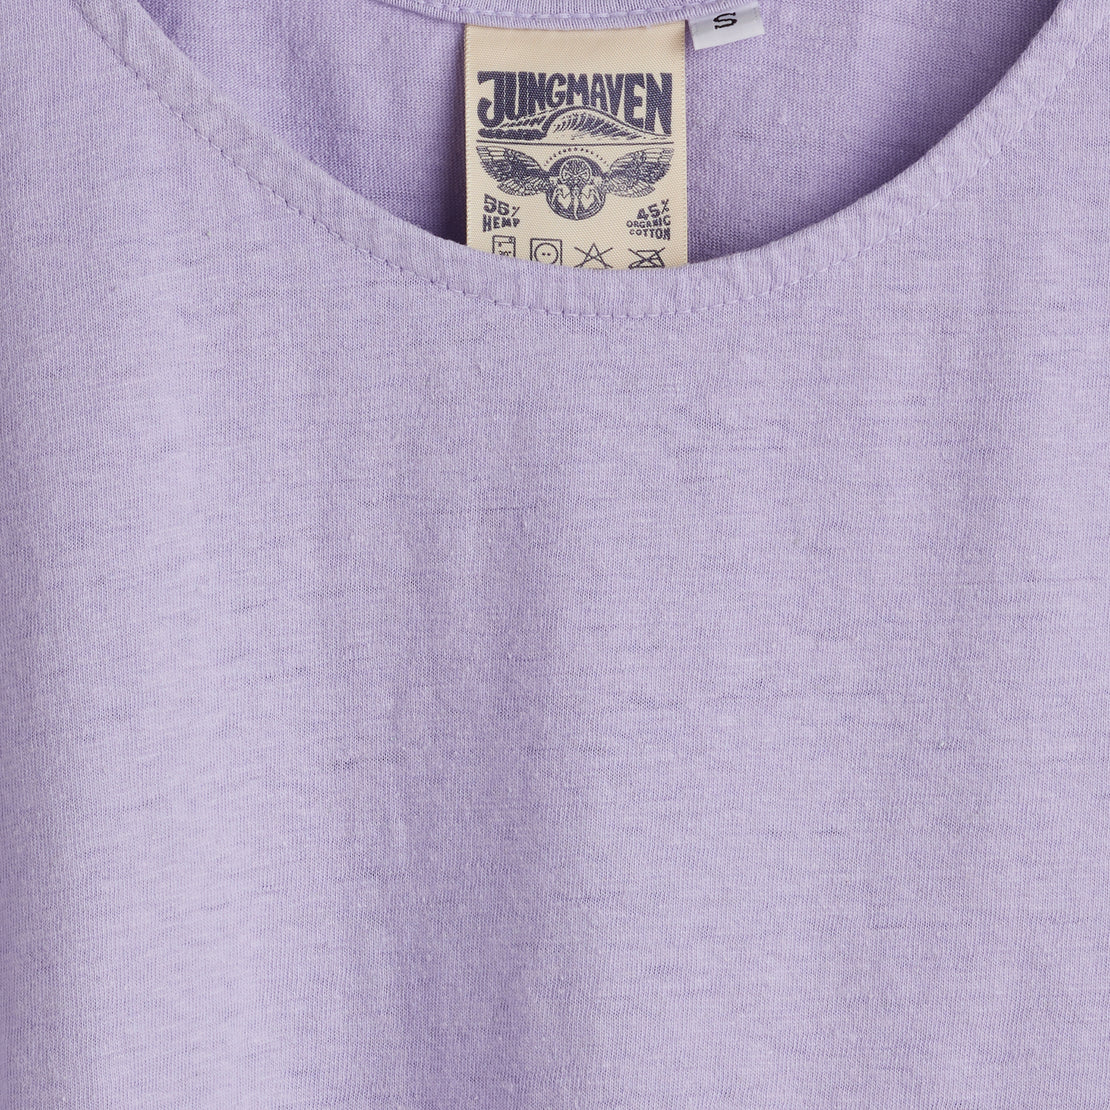 Cropped Tank - Misty Lilac - Jungmaven - STAG Provisions - W - Tops - Sleeveless